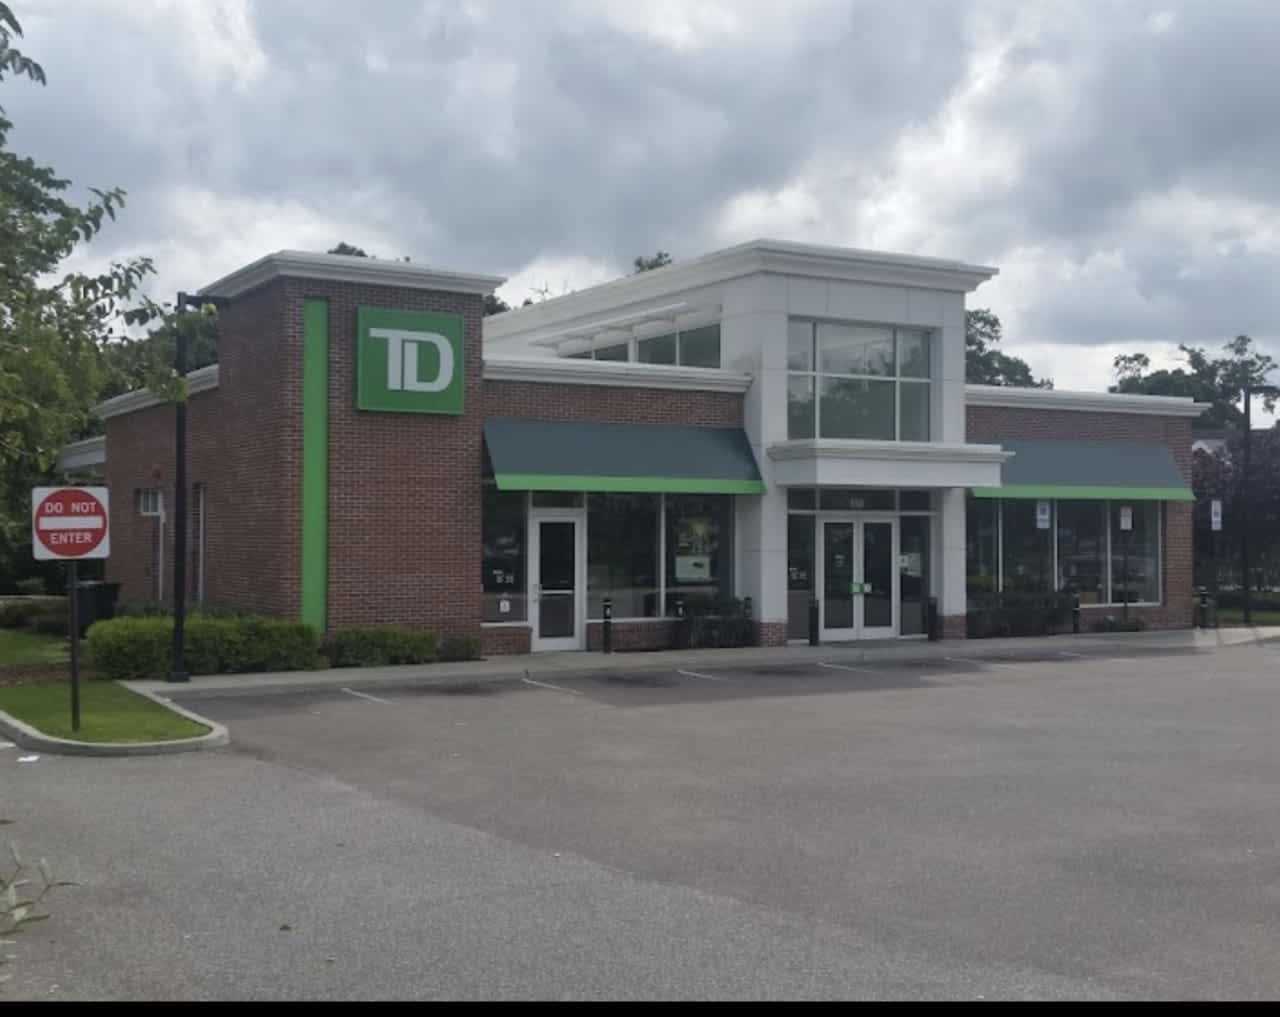 Police are searching for a suspect who attempted to rob a TD Bank in Sayville.